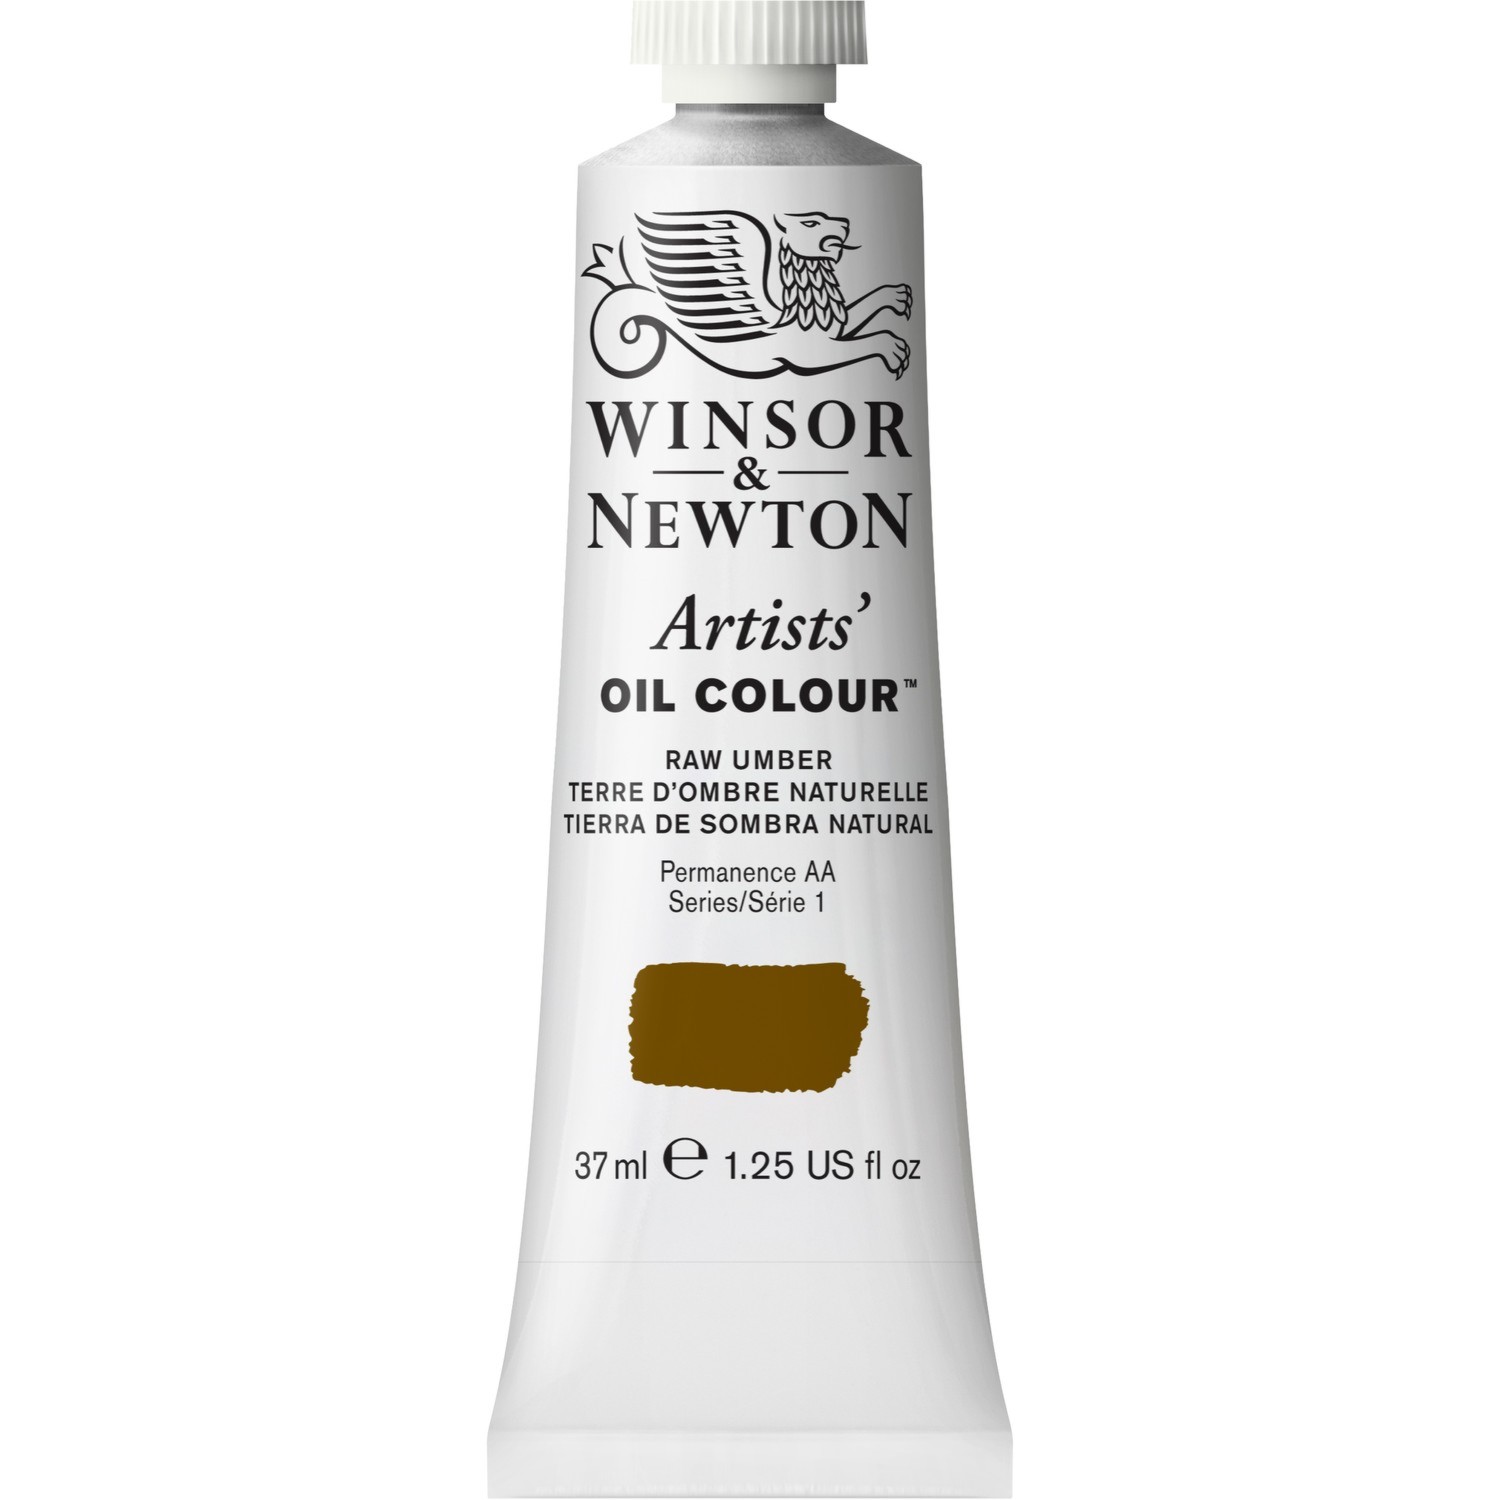 Winsor and Newton 37ml Artists' Oil Colours - Raw Umber Image 1